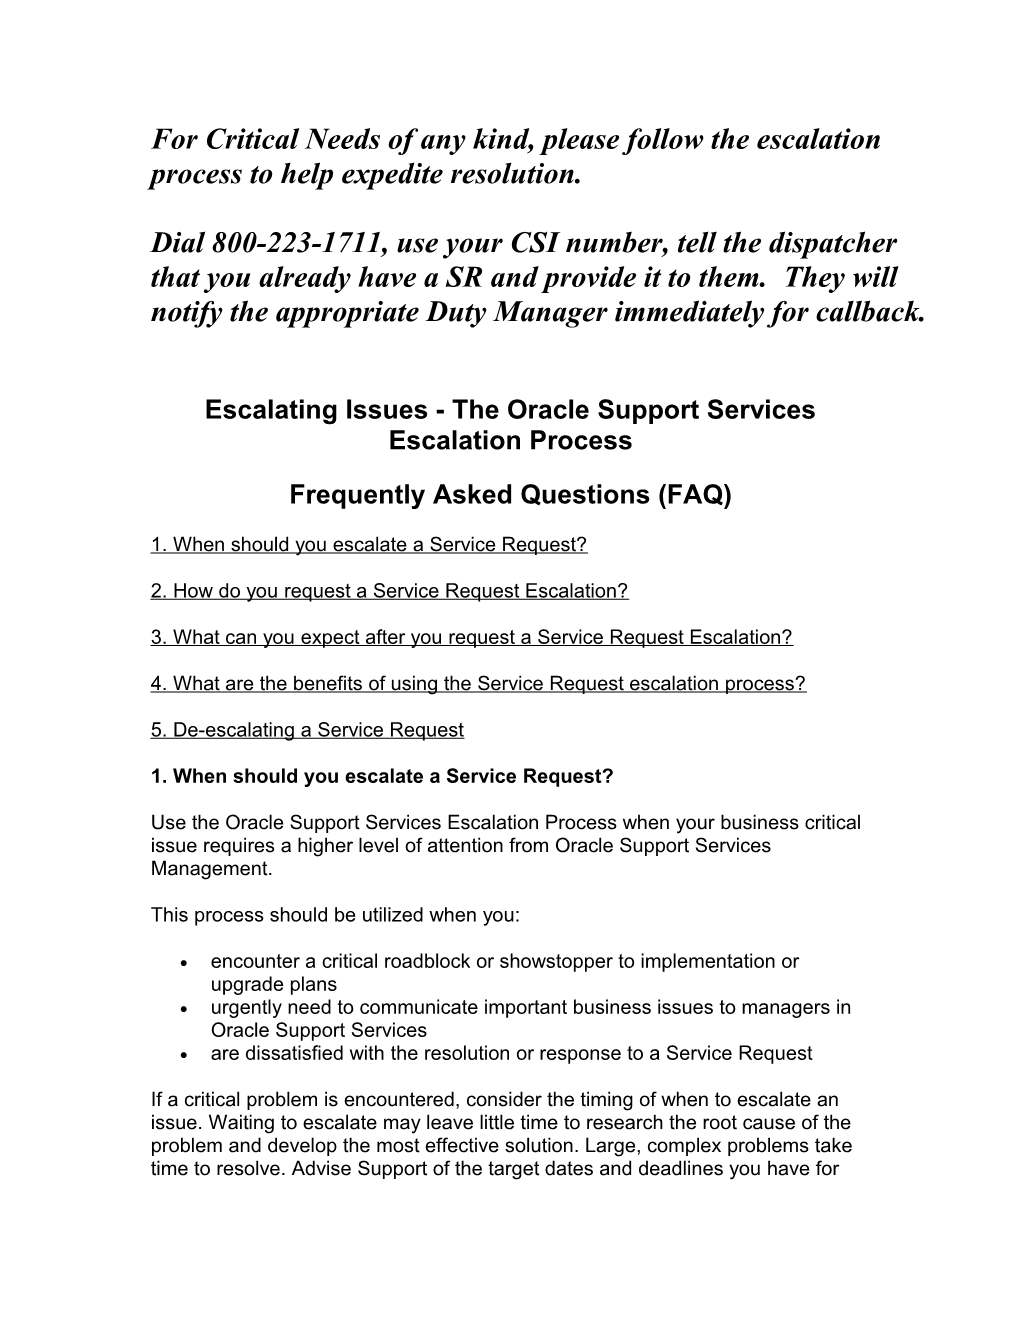 Escalating Issues - the Oracle Support Services Escalation Process